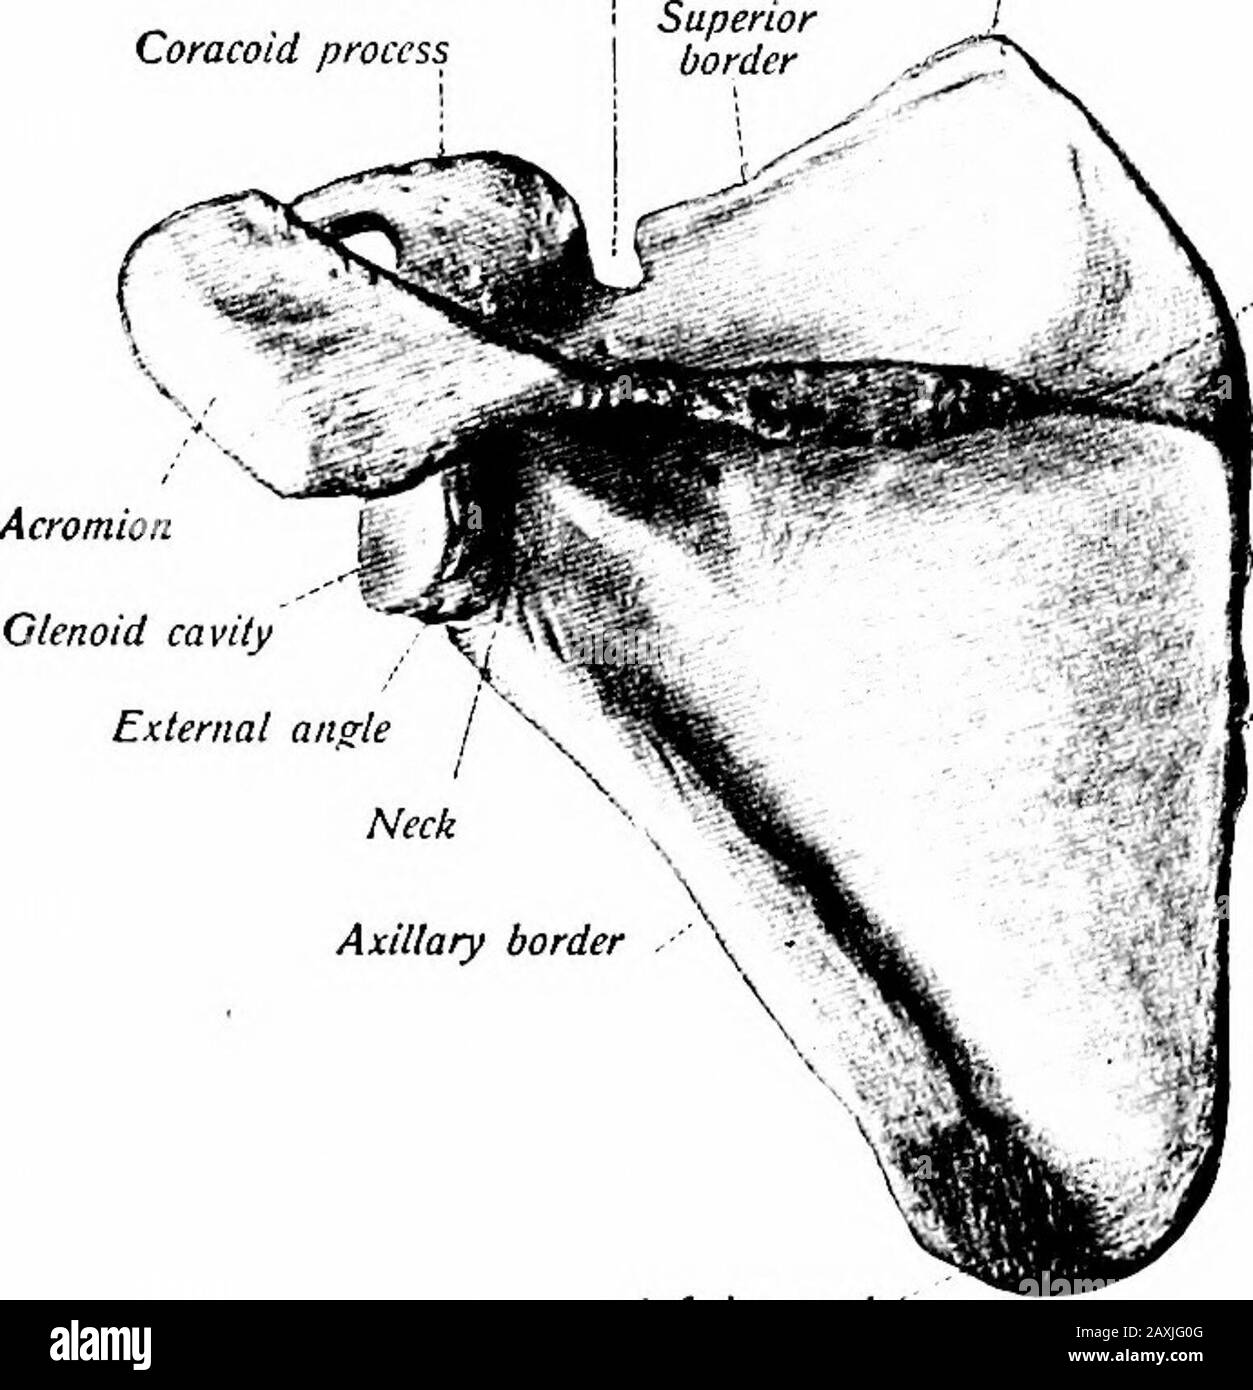 A manual of anatomy . , or vertebral margin the m. serratus anterior is inserted.The superior half of the lateral, or axillary margin is thick deepen-ing the fossa in this area. The surface of the bone shows severalridges that converge toward the neck. The fossa and ridges giveorigin to the m. subscapularis. The dorsal surface {fades dorsalis) is crossed, almost horizontally,by the spine, which divides this surface into two portions or fossae.The upper, smaller supraspinous fossa is above the spine and thelatter forms its floor. From the outer part arises the m. supra-spinatus. This fossa comm Stock Photo